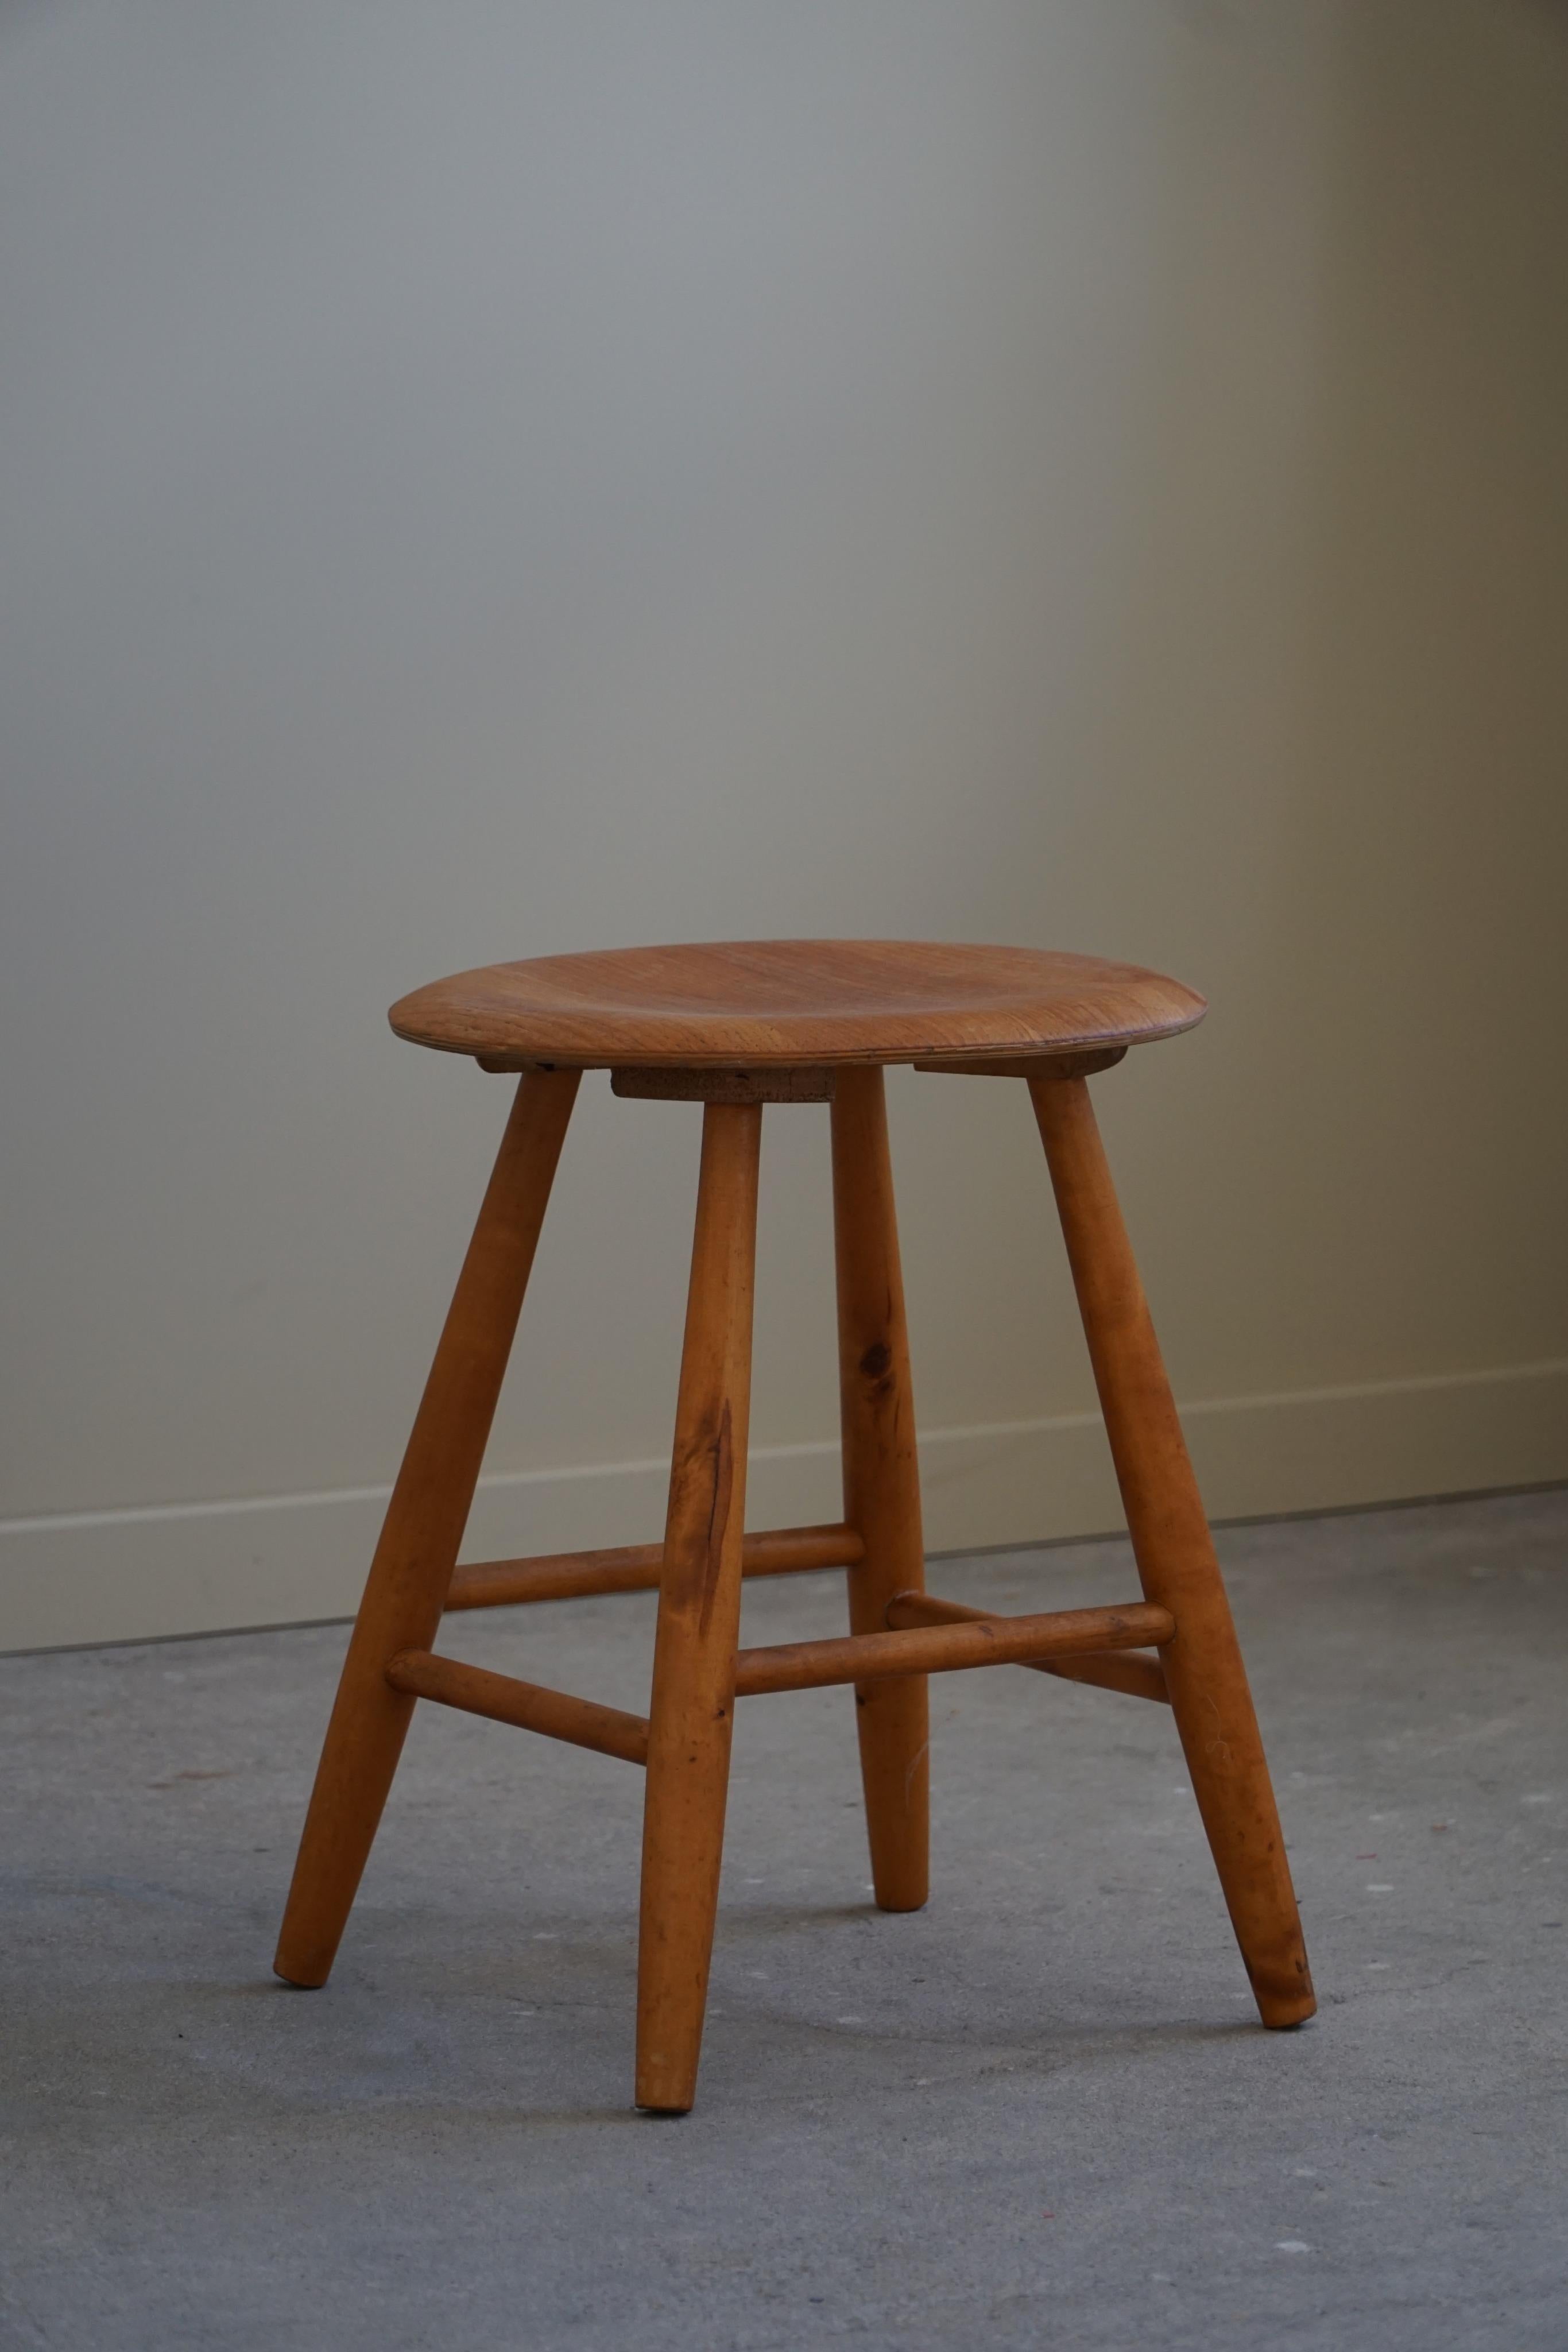 Round Stool in Beech by a Danish Cabinetmaker, Mid Century Modern, 1970s For Sale 7